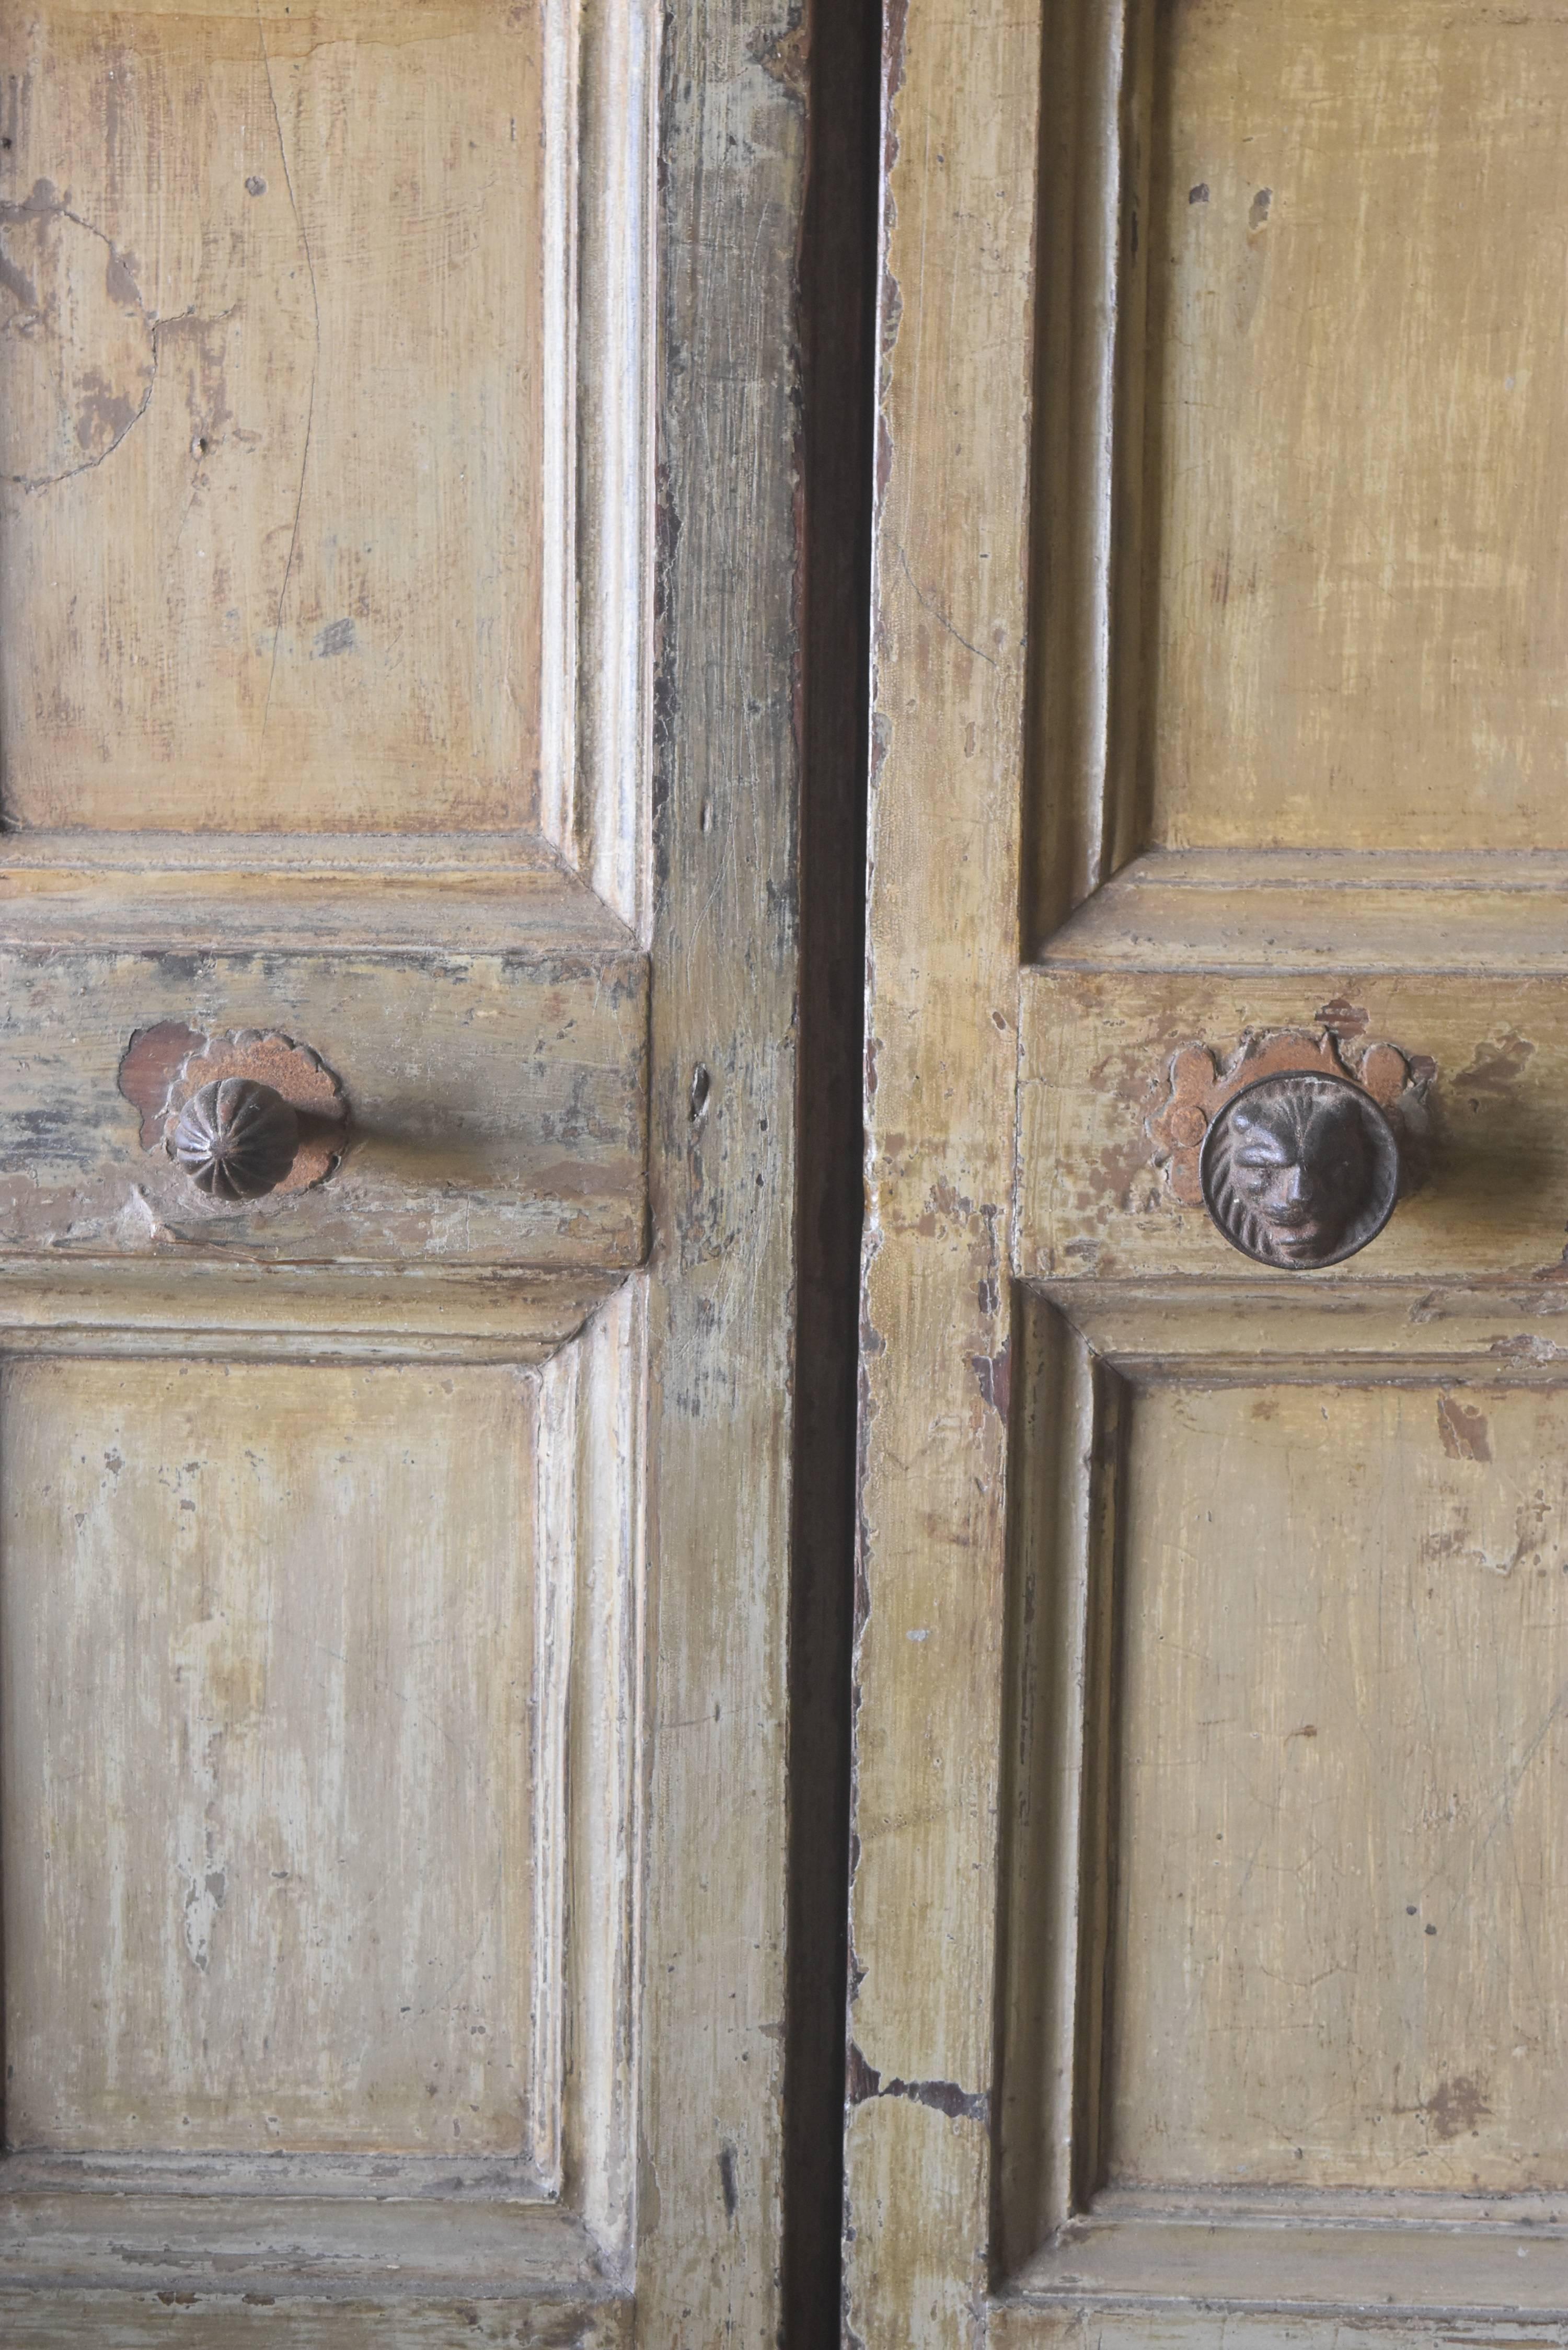 Painted Spanish Late 18th Century 12-Panel Doors with Original Hardware and Paint